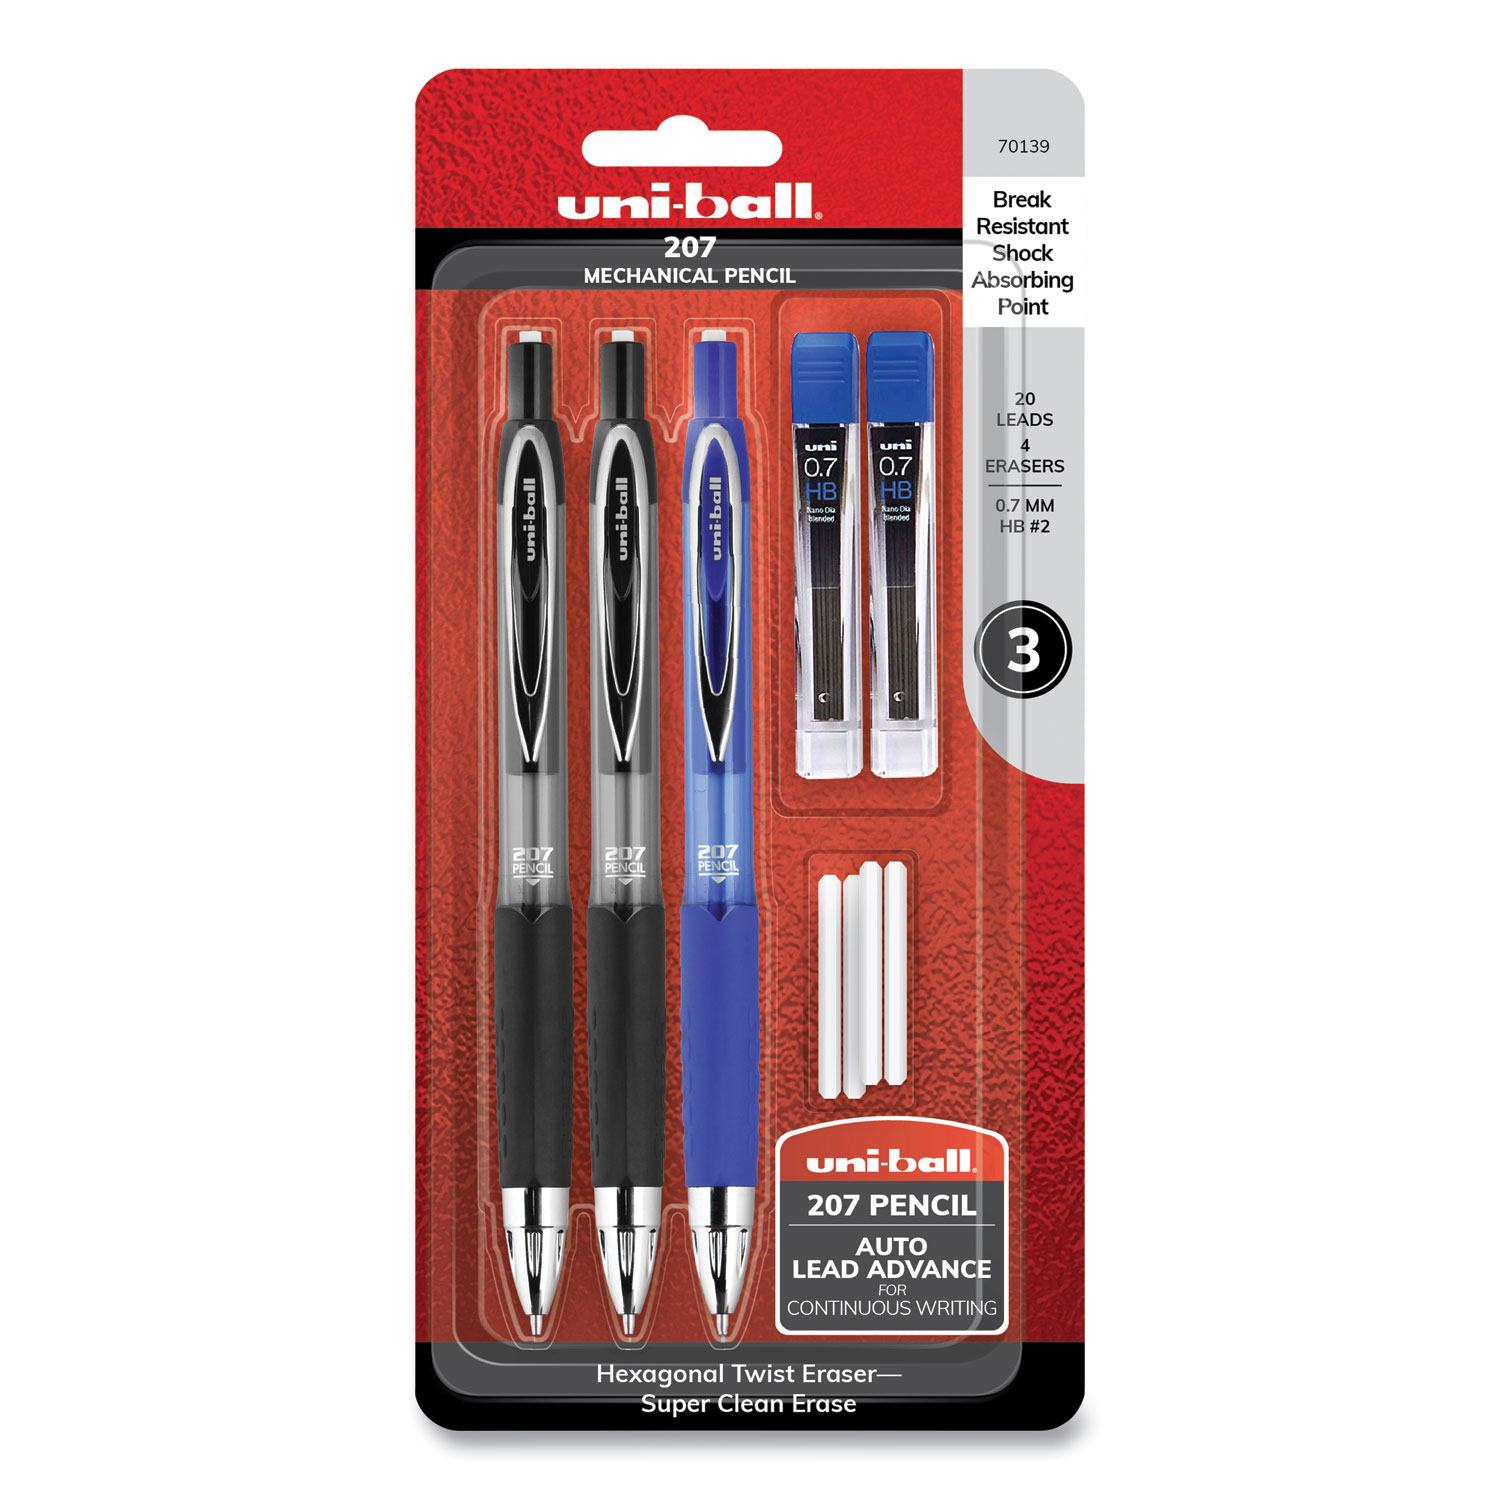  uni-ball 70139 207 Mechanical Pencil with Lead and Eraser Refills, 0.7 mm, HB (#2), Black Lead, Assorted Barrel Colors, 3/Set (UBC70139) 